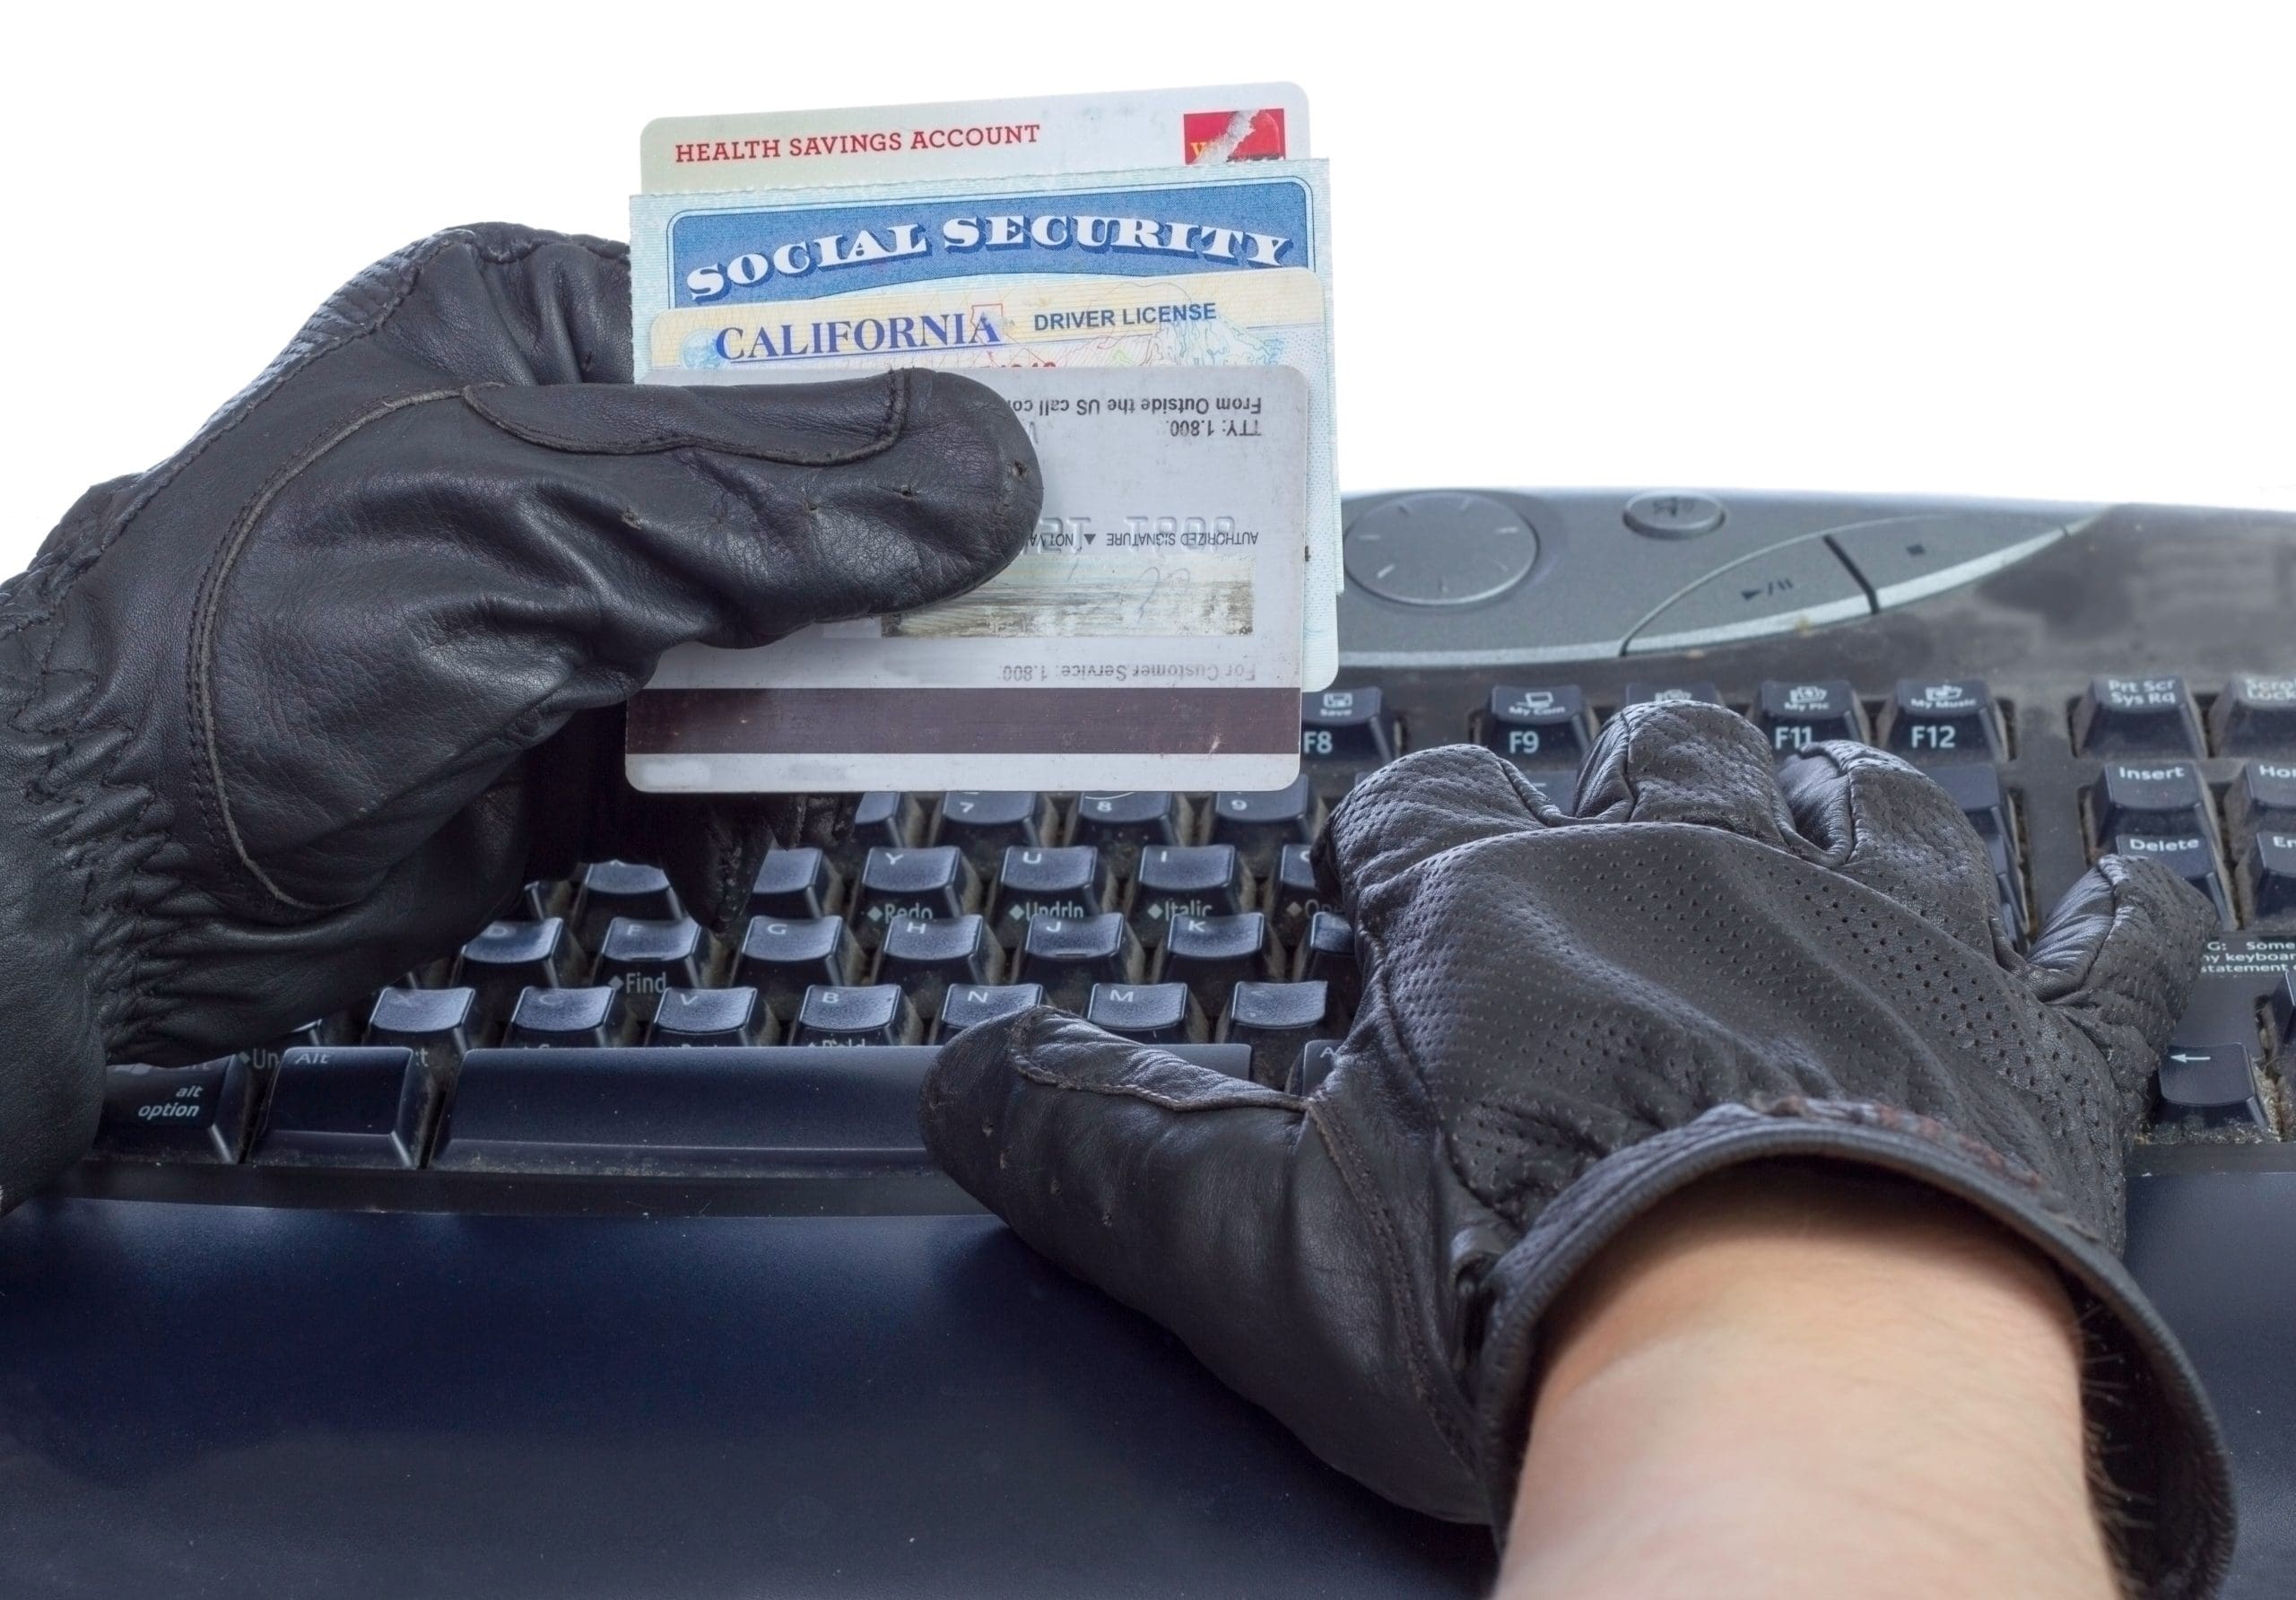 An individual with black gloves carefully handling an SSI card on a keyboard, potentially indicating involvement in identity theft or the need for expungement.